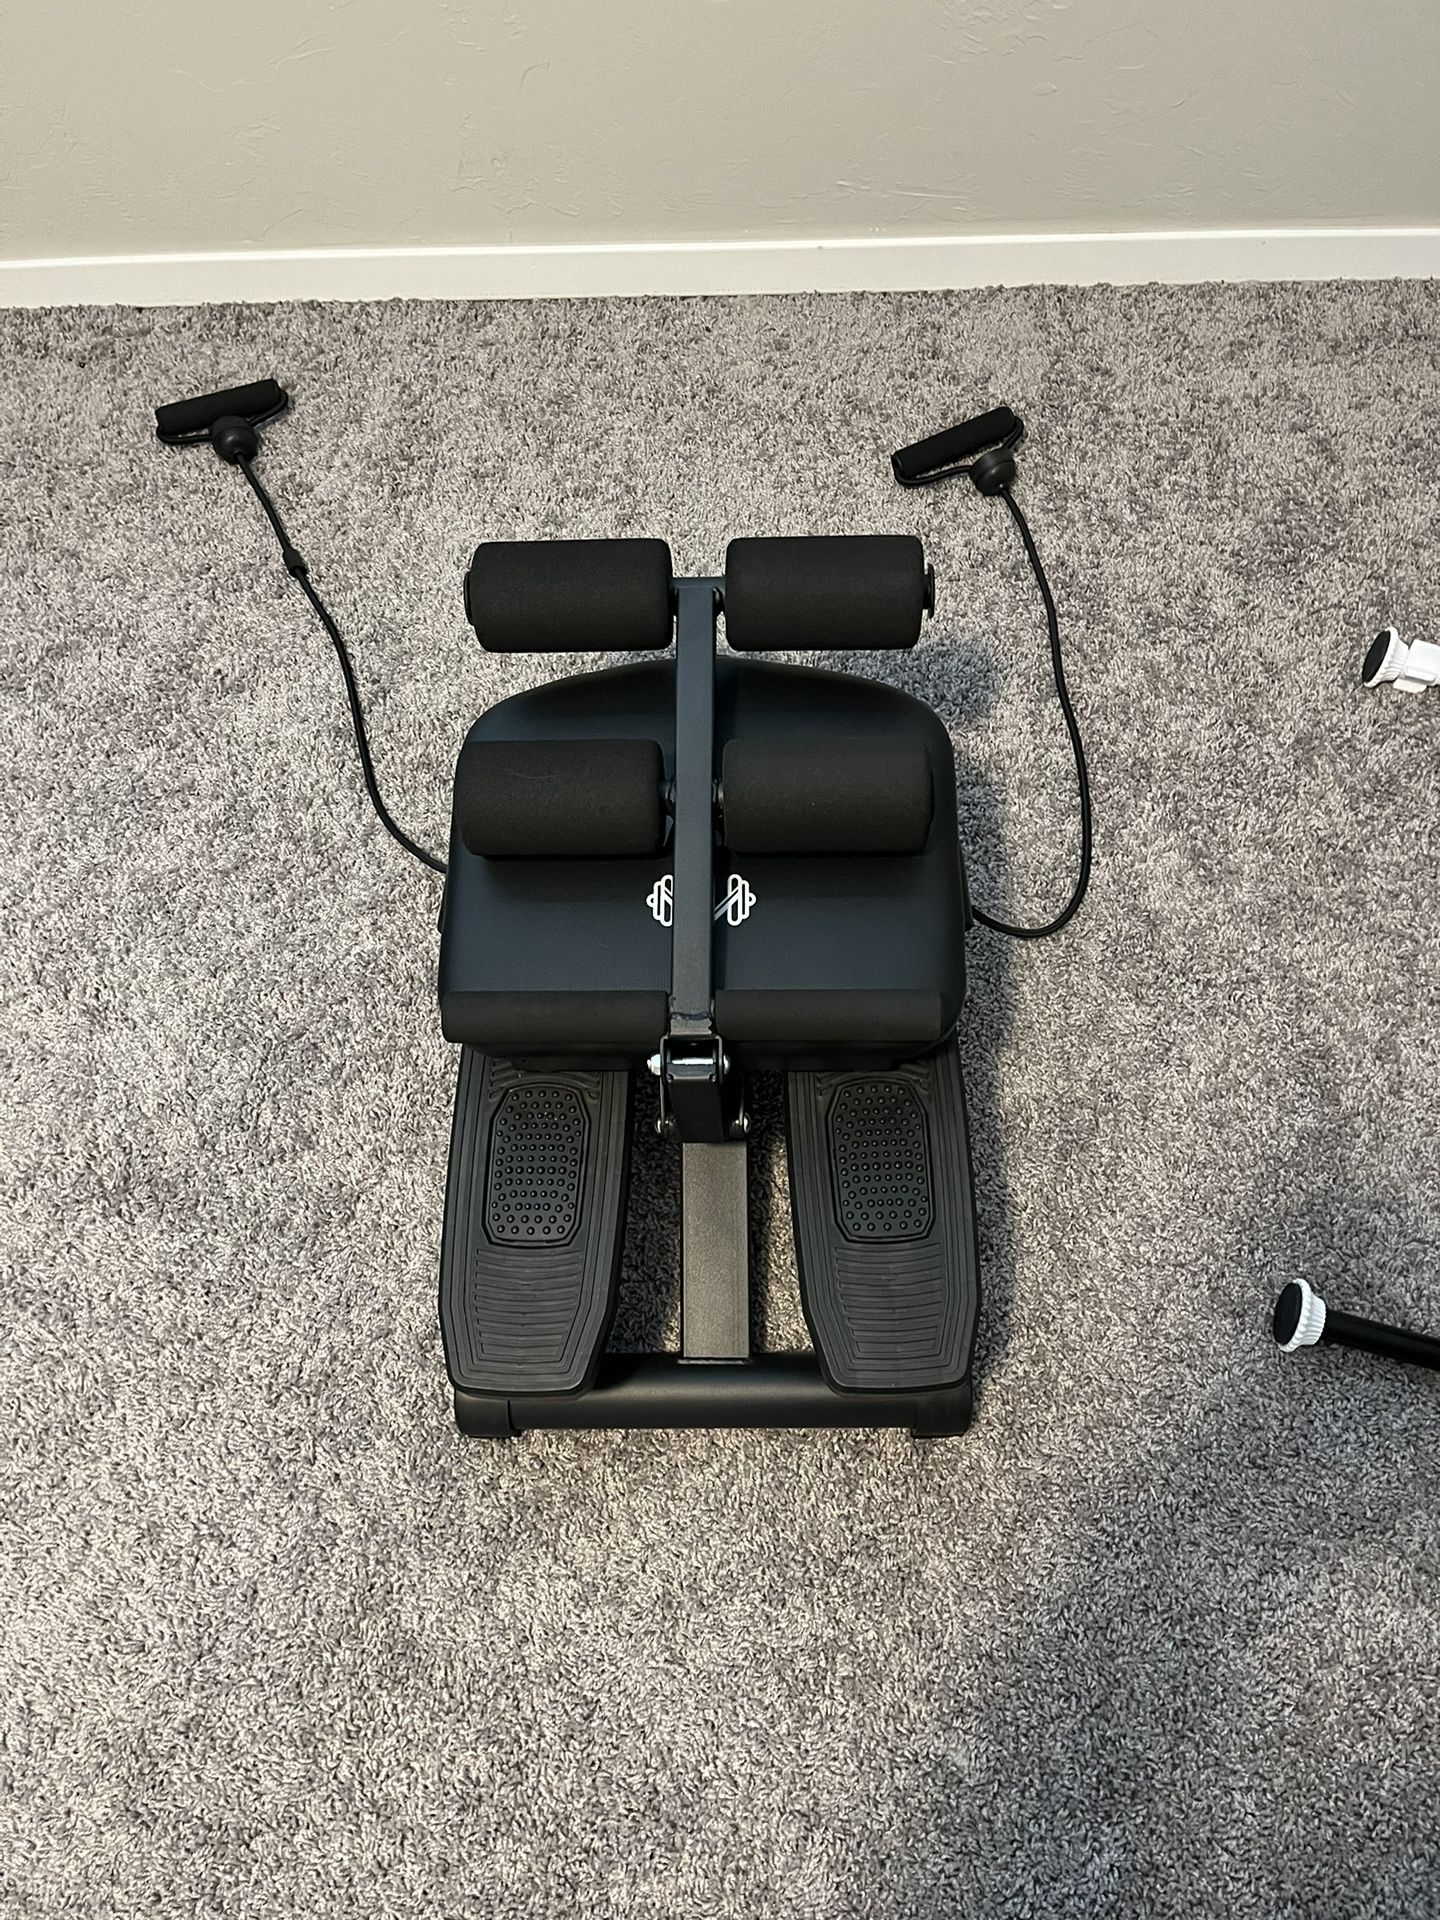 Stair Stepper With Ab Machine And Resistance Bands